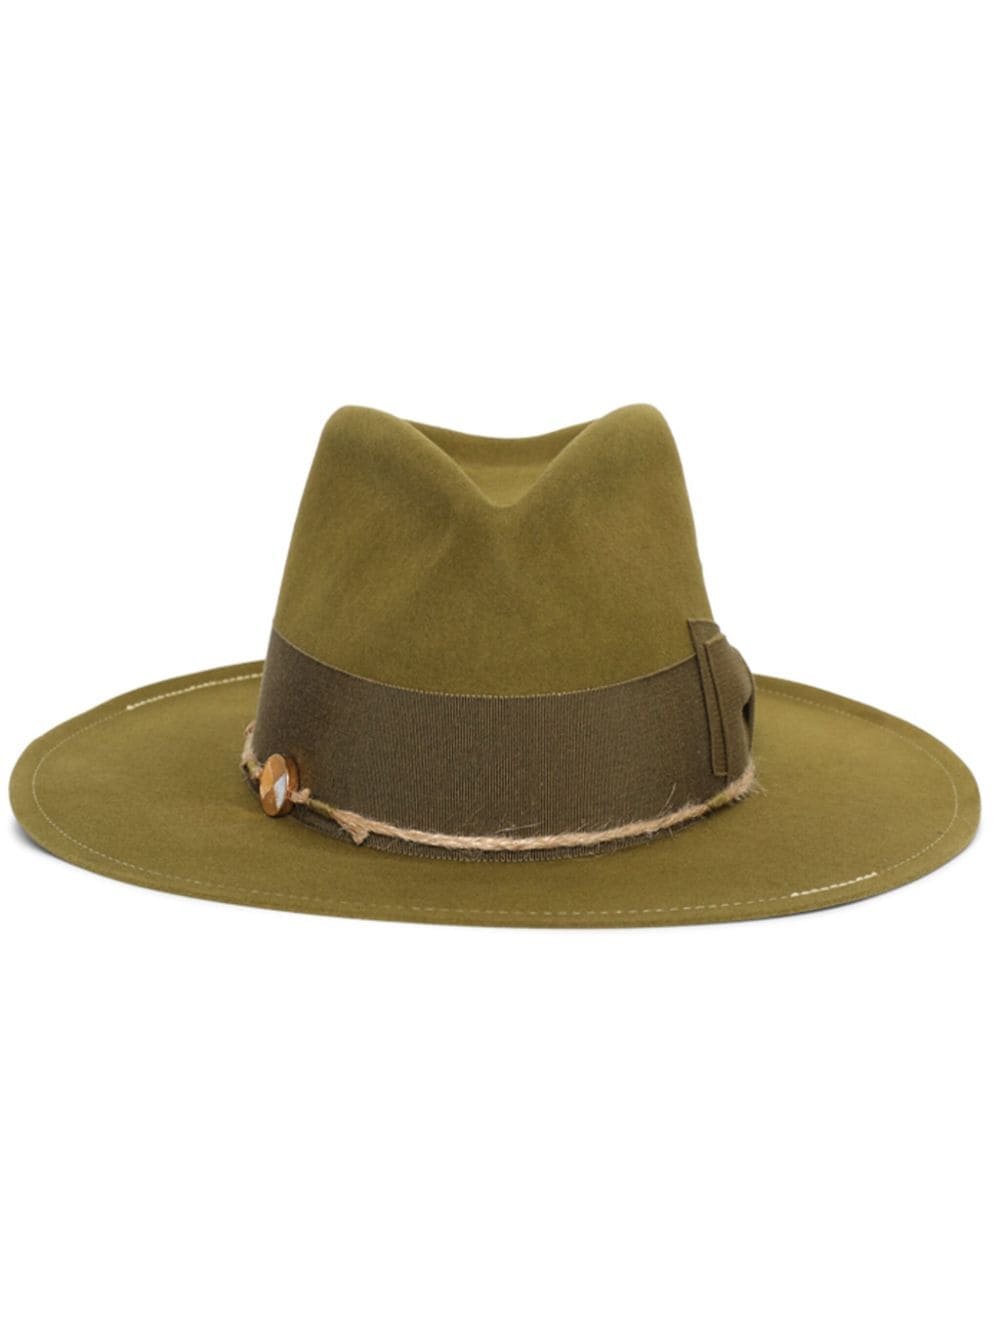 River Song fedora hat